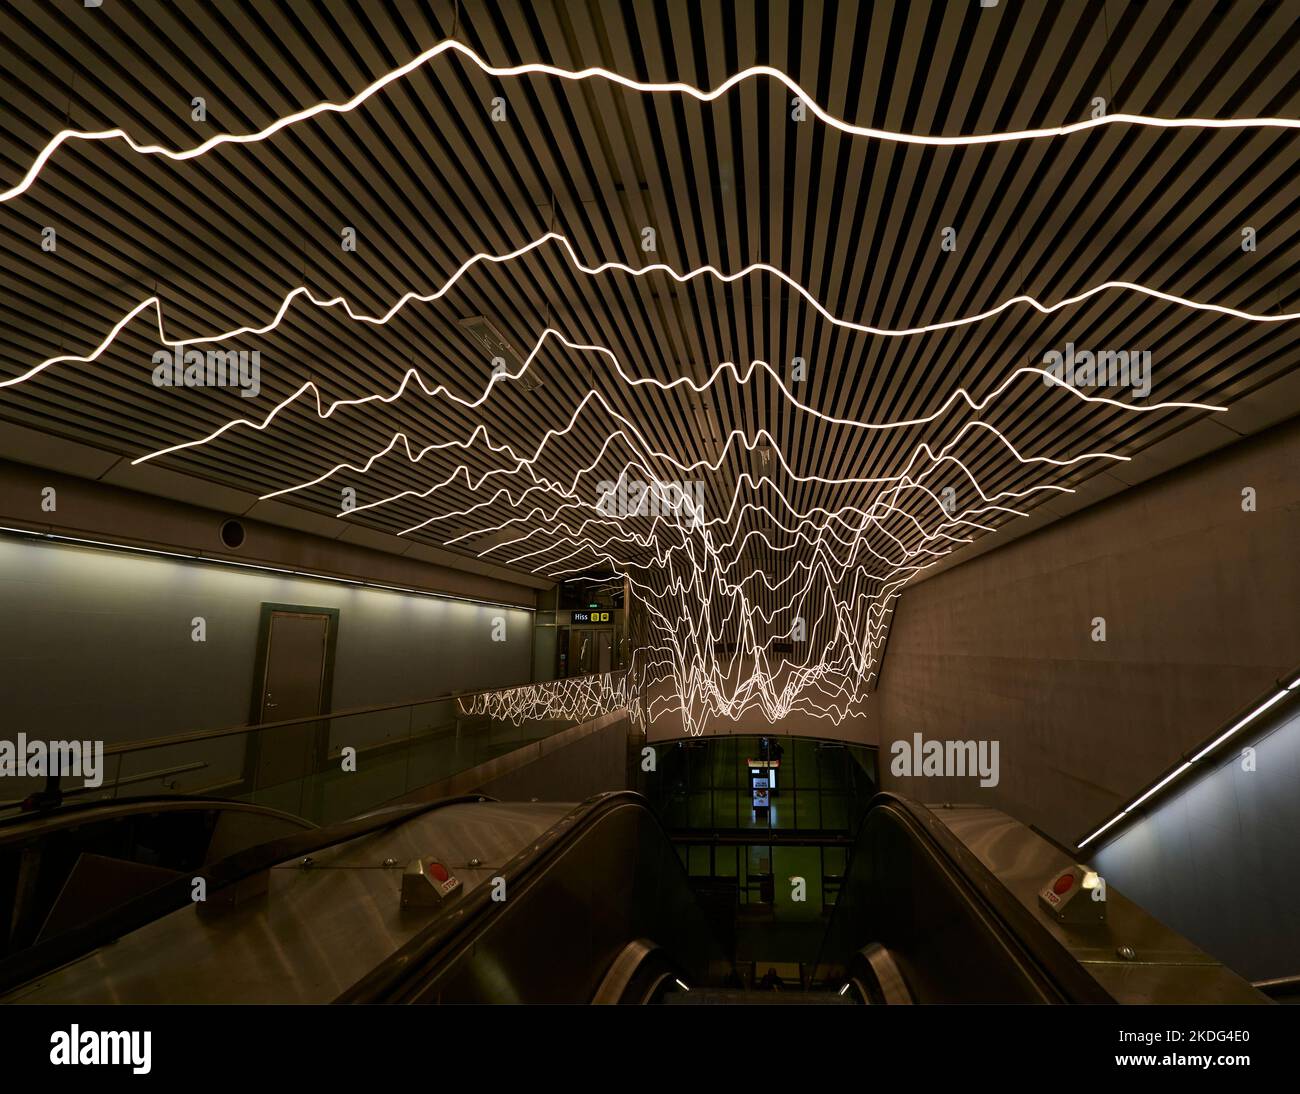 Stockholm Odenplan Tube Metro or Subway stations artwork said to be the world's longest art exhibit Sweden Stock Photo